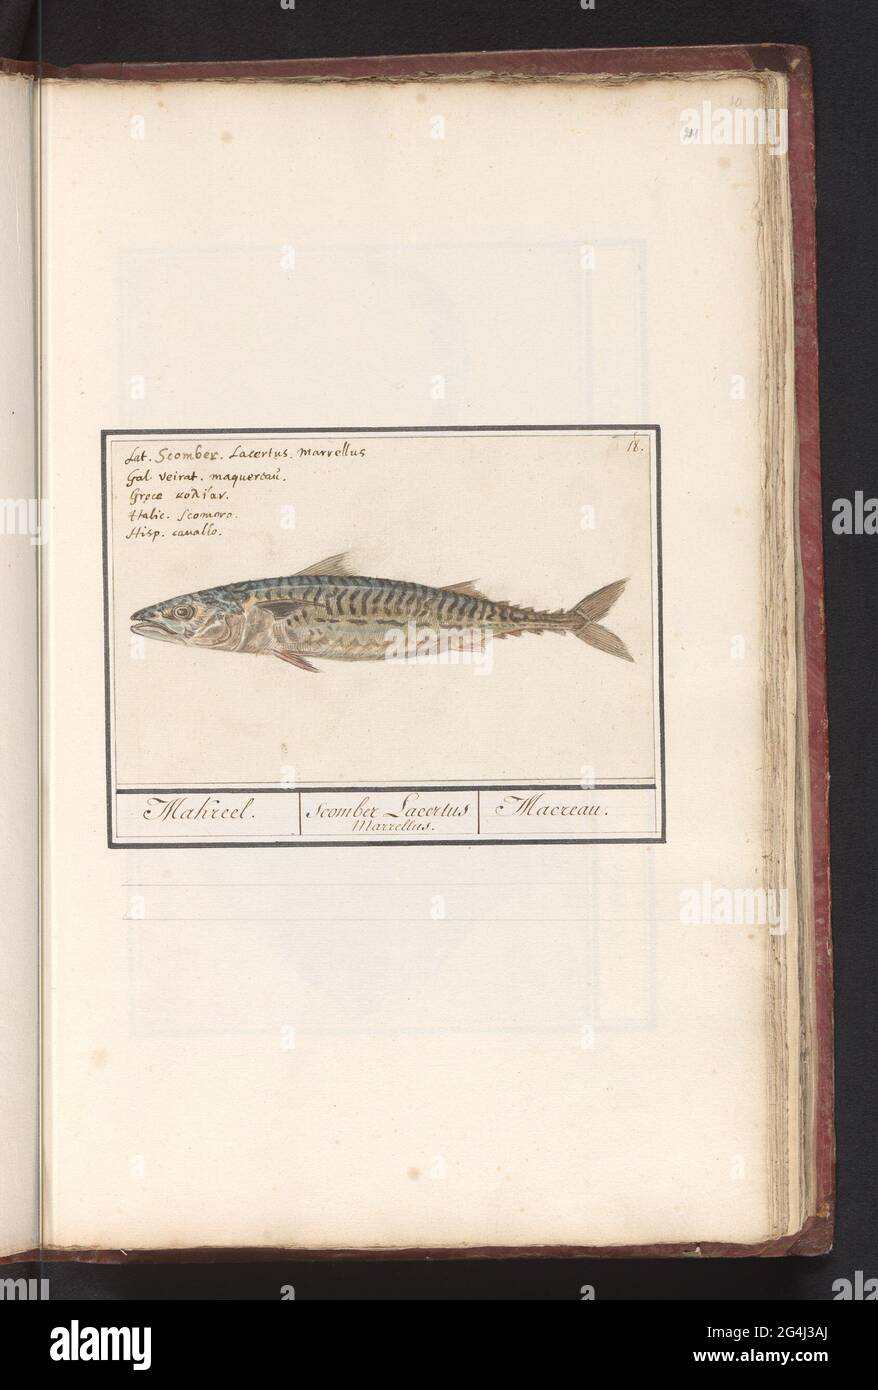 Mackerel (Scomber Scombrus); Mackerel. / Scomber Lacertus Marrellus. / Macreau .. mackerel. Numbered at the top right: 18. Above the name in five languages. Part of the sixth album with drawings of fish, shells and insects. Sixth of twelve albums with drawings of animals, birds and plants known around 1600, commissioned by Emperor Rudolf II. With explanation in Dutch, Latin and French. Stock Photo